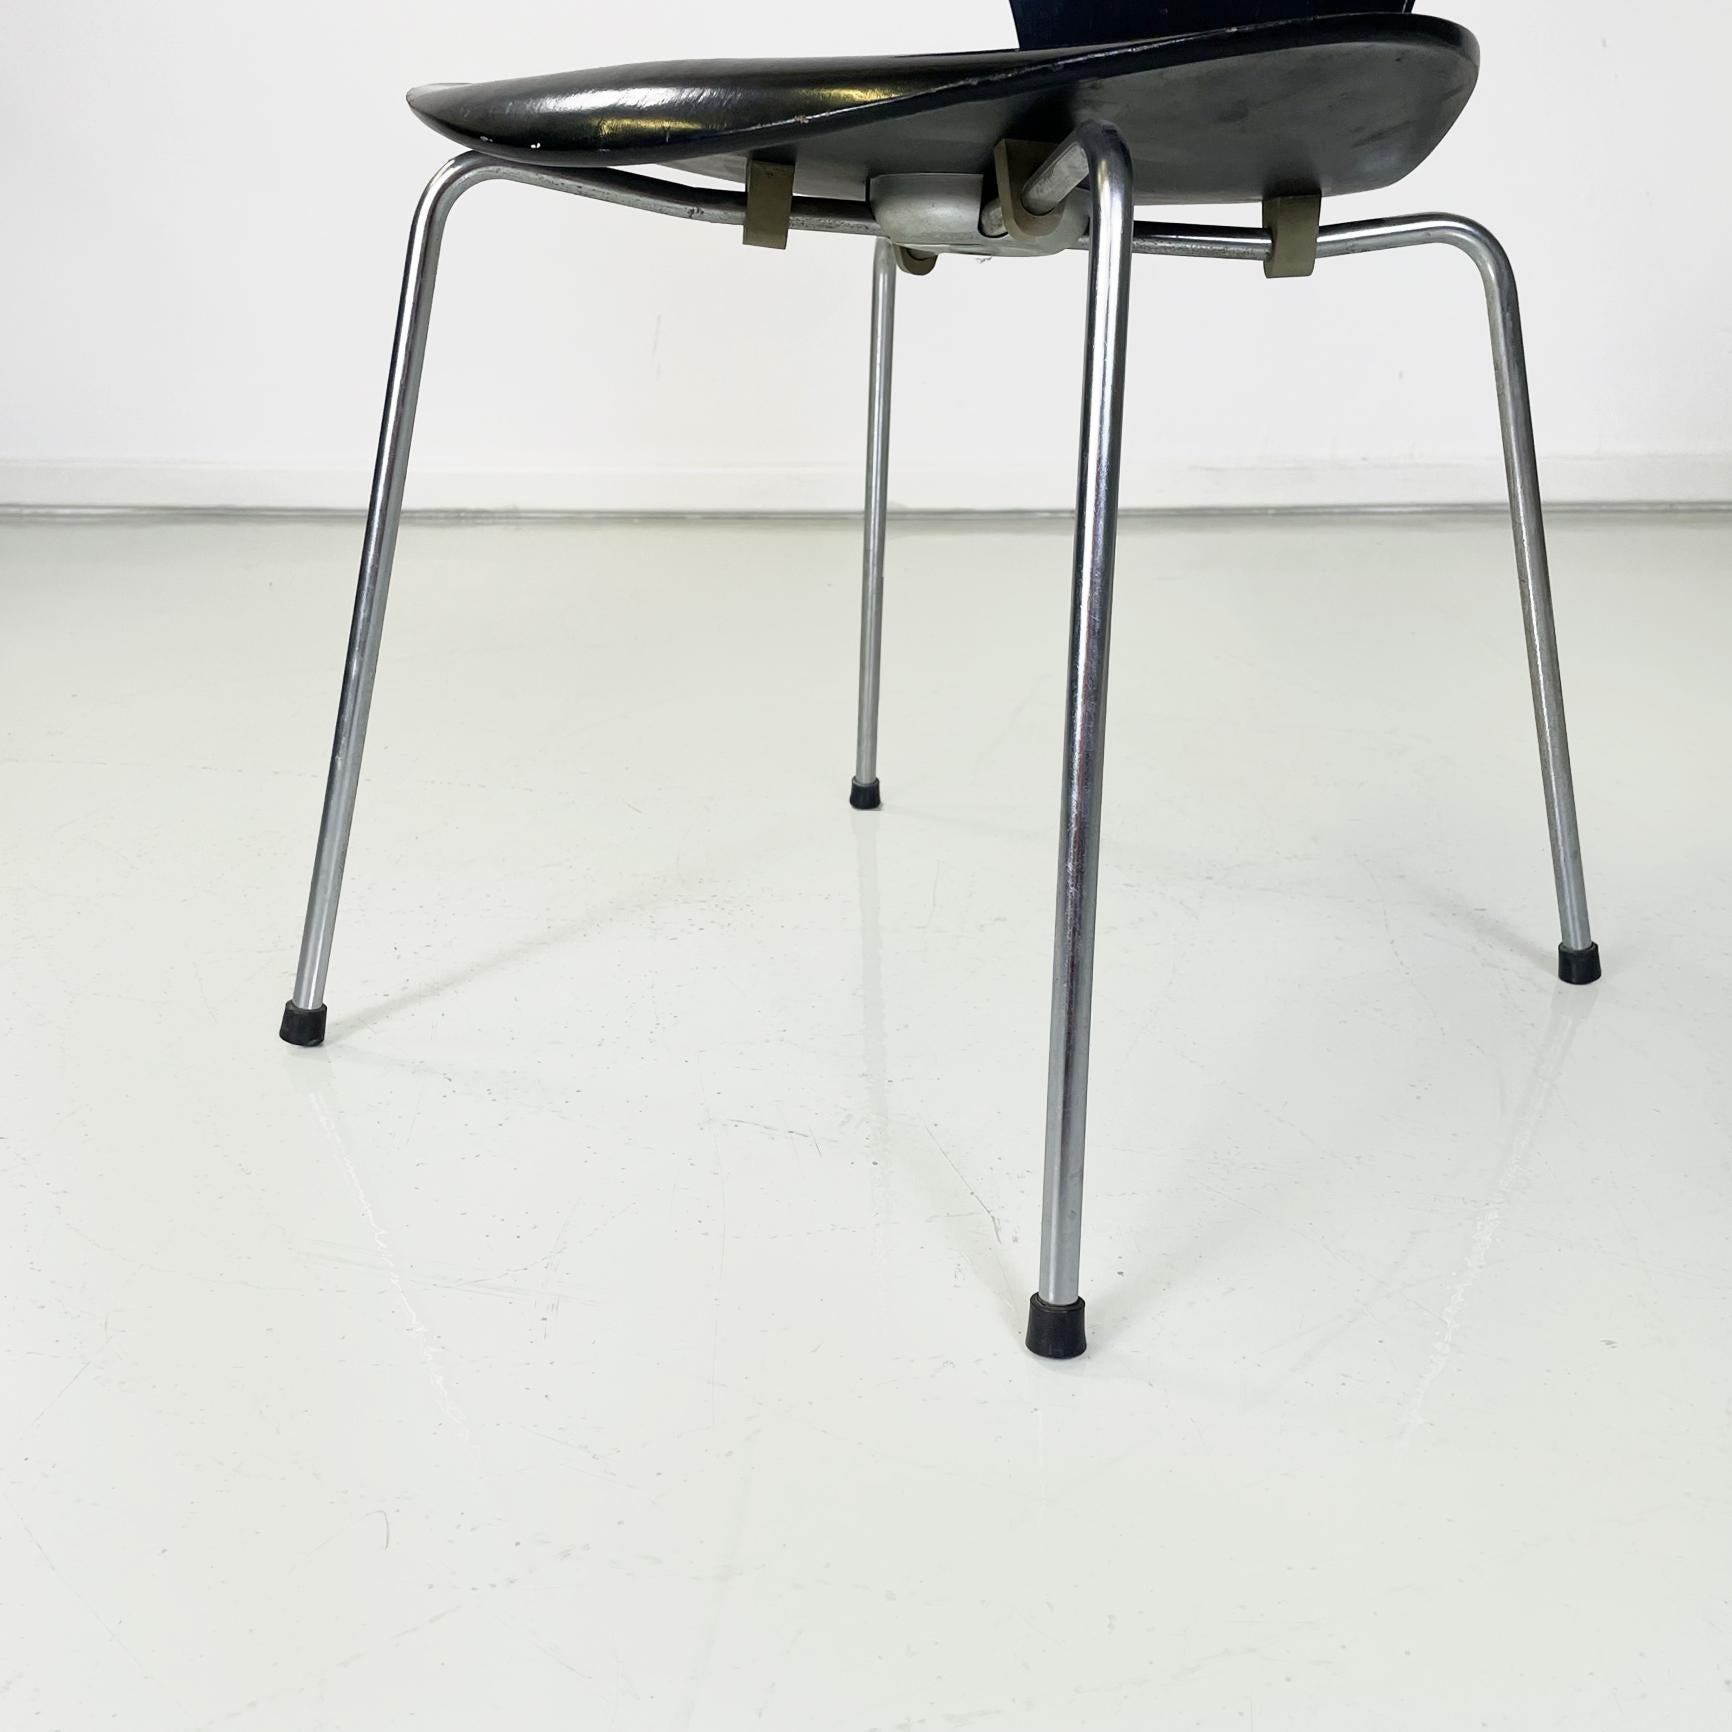 Danish modern Black wood Chairs 7 Series by Jacobsen for Fritz Hansen, 1970s For Sale 7